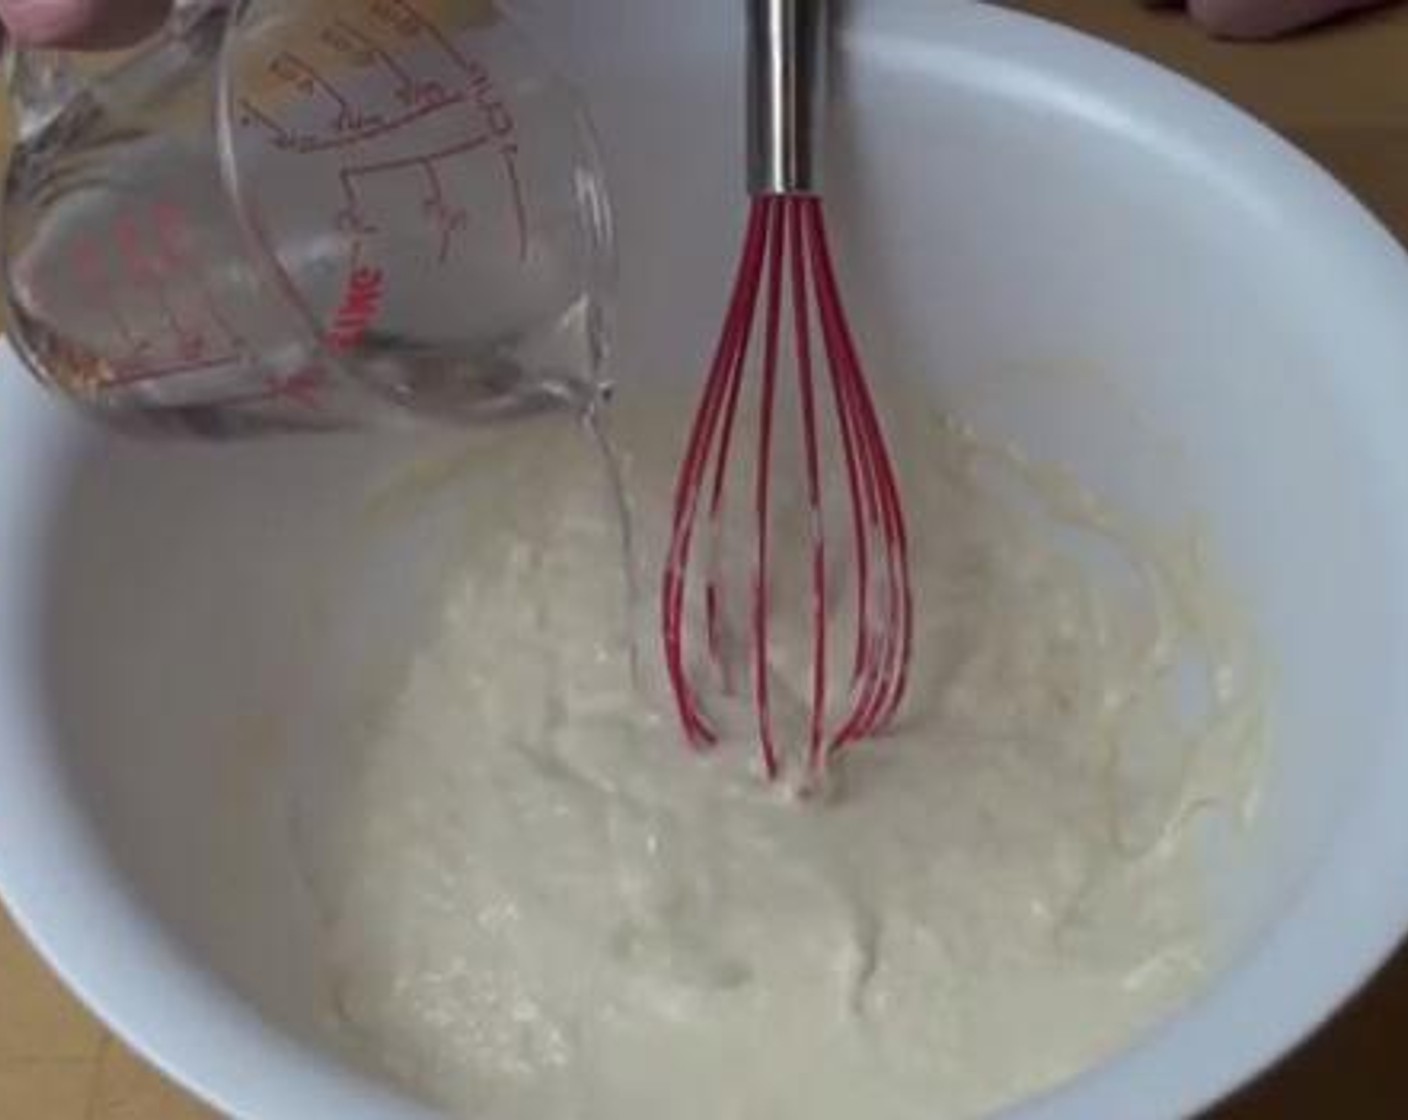 step 3 After an hour, add another Water (1/2 cup) with Baking Soda (1/4 tsp) and whisk the dough together. Cover that up again and leave it up for about an hour.